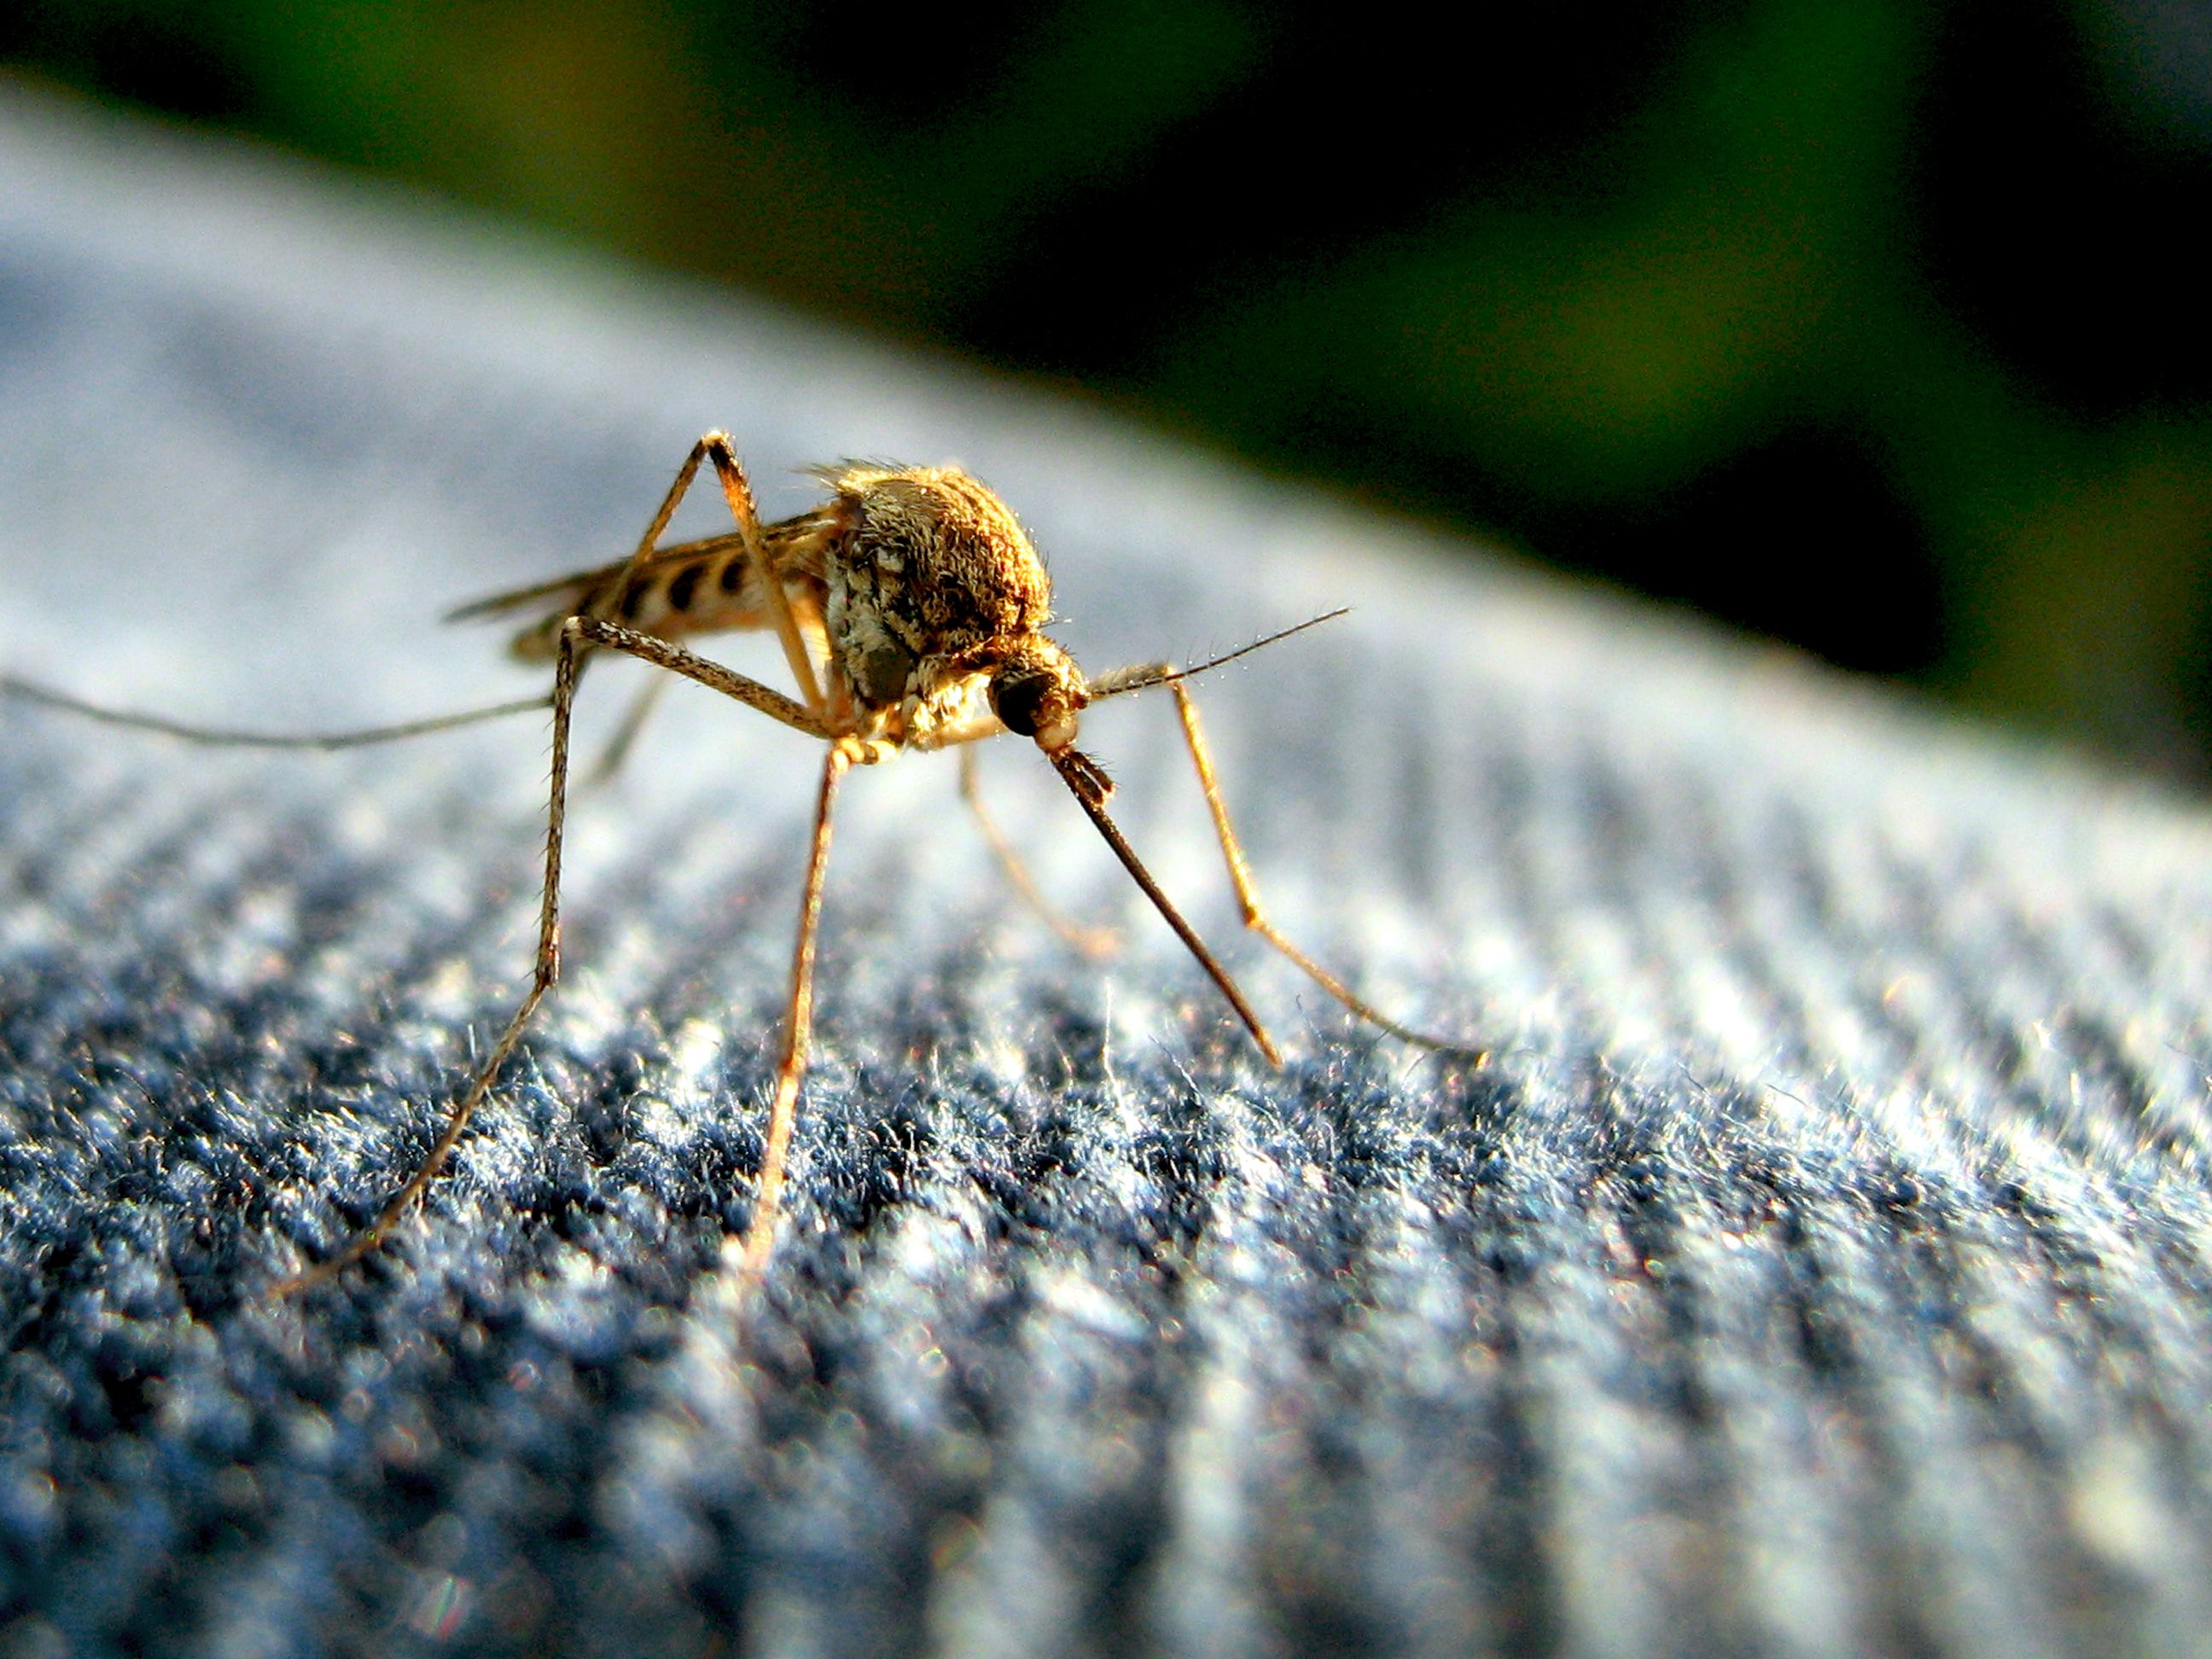 The debate over whether or not to test genetically-modified mosquitoes has reached a fever pitch in Key West. Image by Tom/Flickr. 2010.